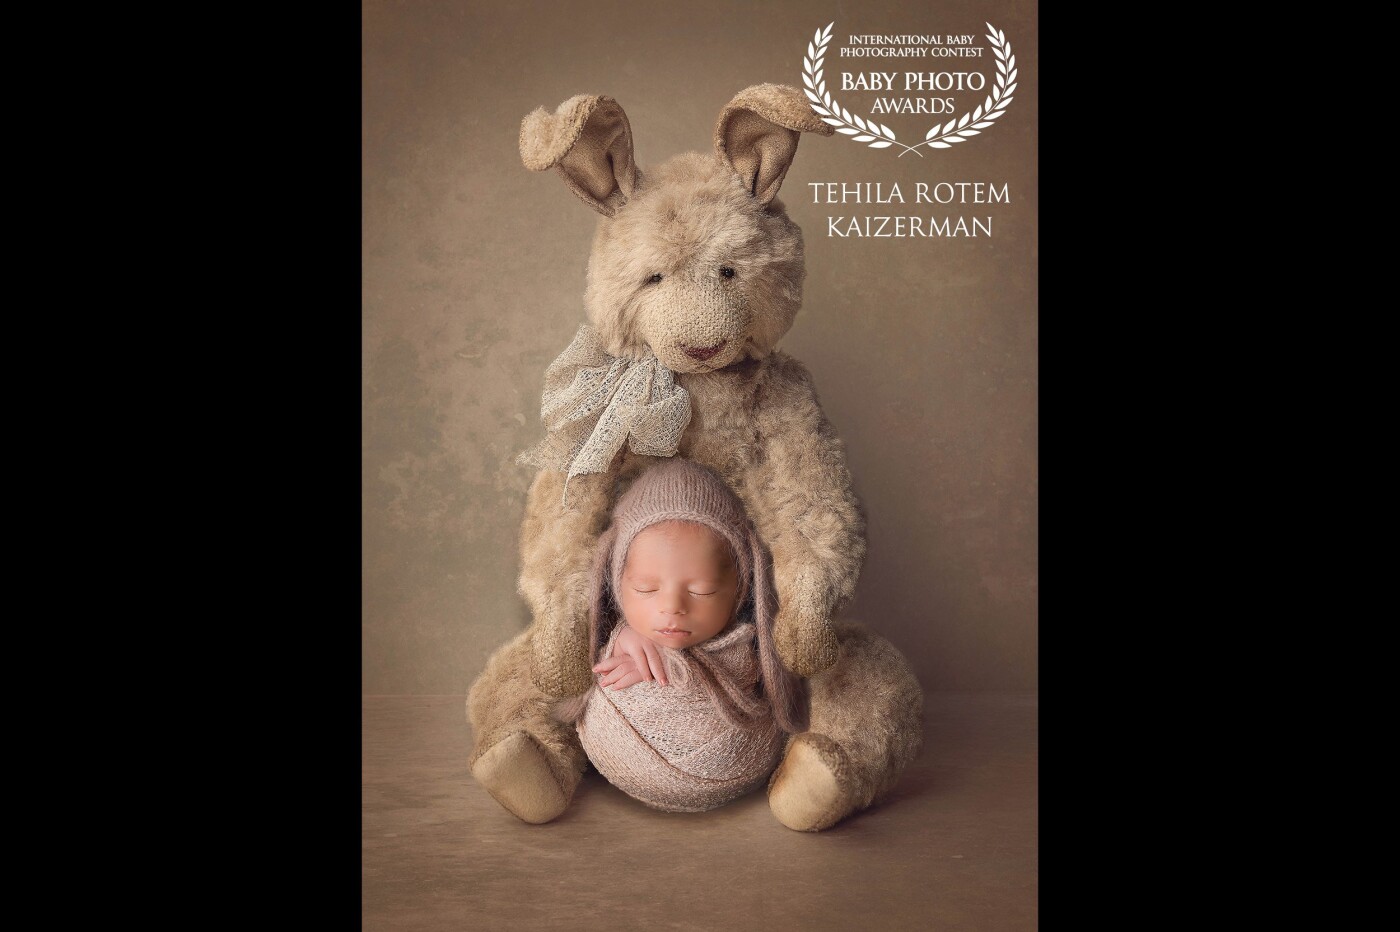 This beautiful baby's name is Muhammad ♥️ He was so comfortable all the shooting. it was very relaxing to make these little baby photos??? Thank you so much Baby Photo Awards for this!!!